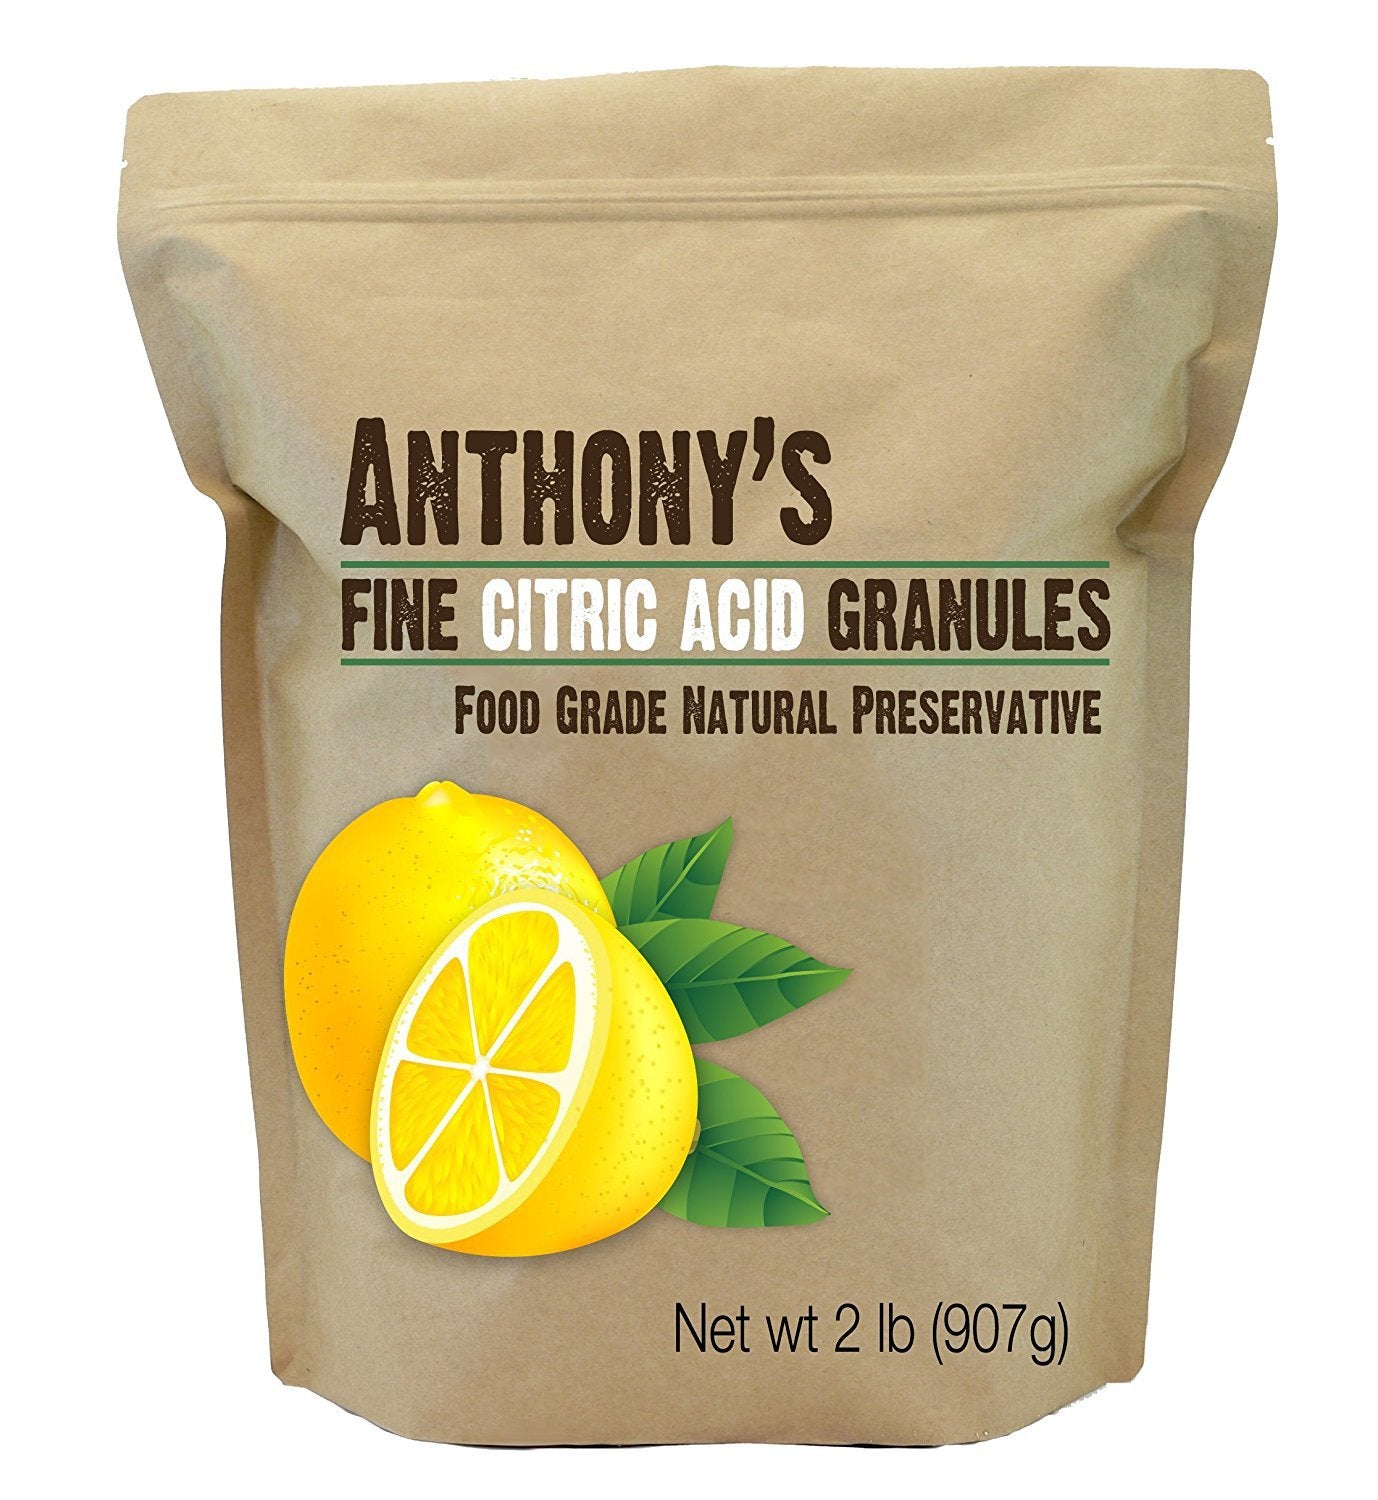 Image of a small brown package from Anthony's Goods containing Granular Citric Acid